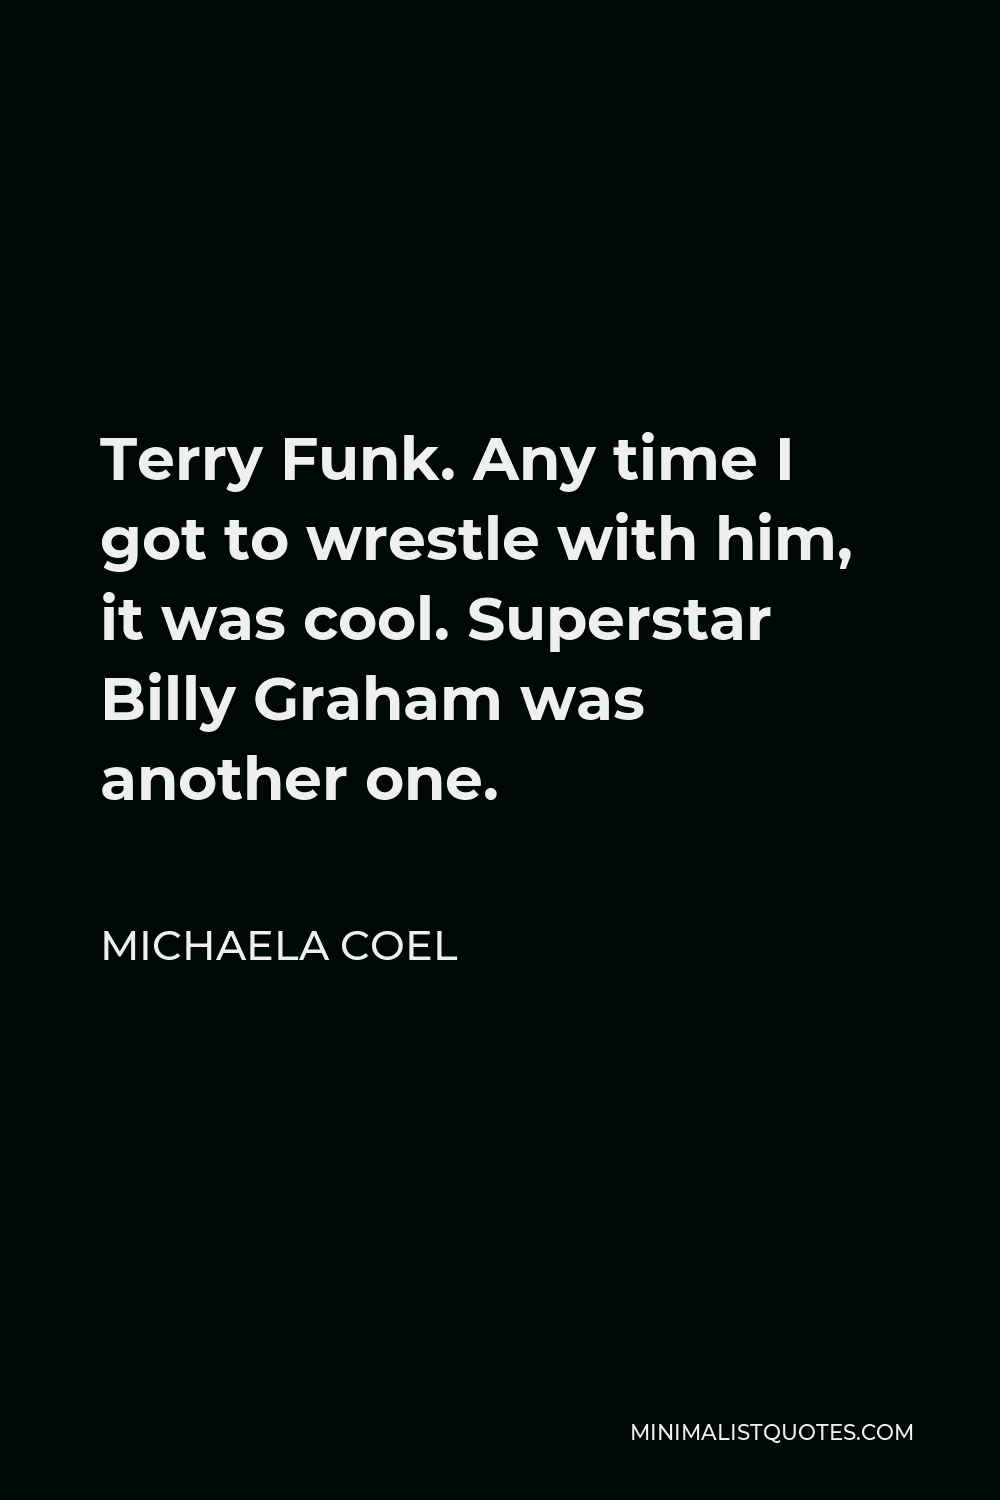 Michaela Coel Quote - Terry Funk. Any time I got to wrestle with him, it was cool. Superstar Billy Graham was another one.